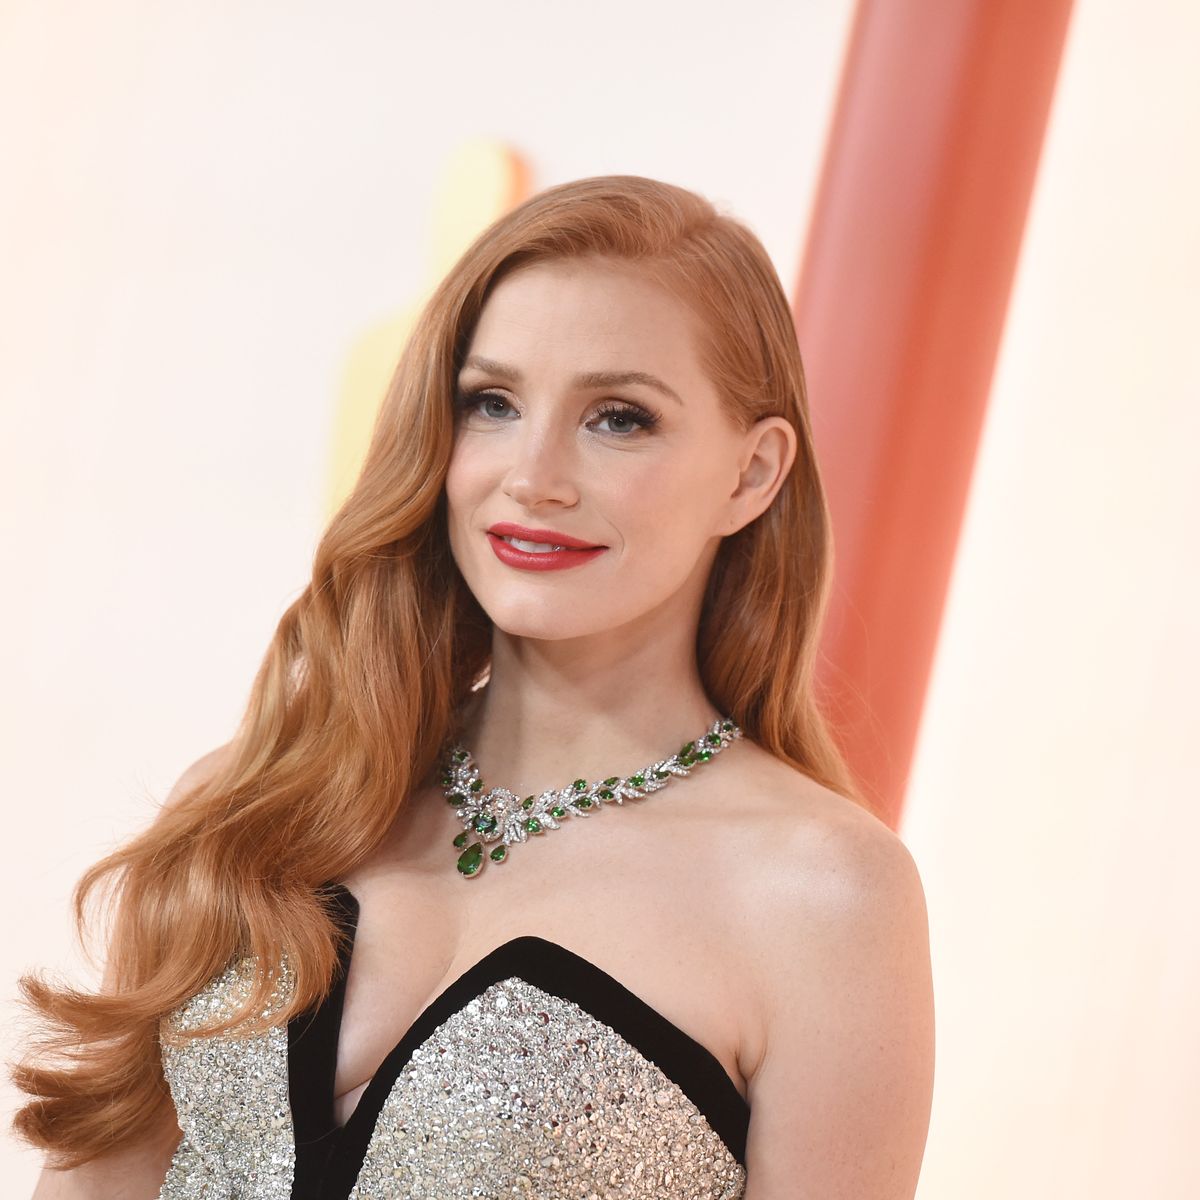 Louis Vuitton - Actress Jessica Chastain wore a bracelet and